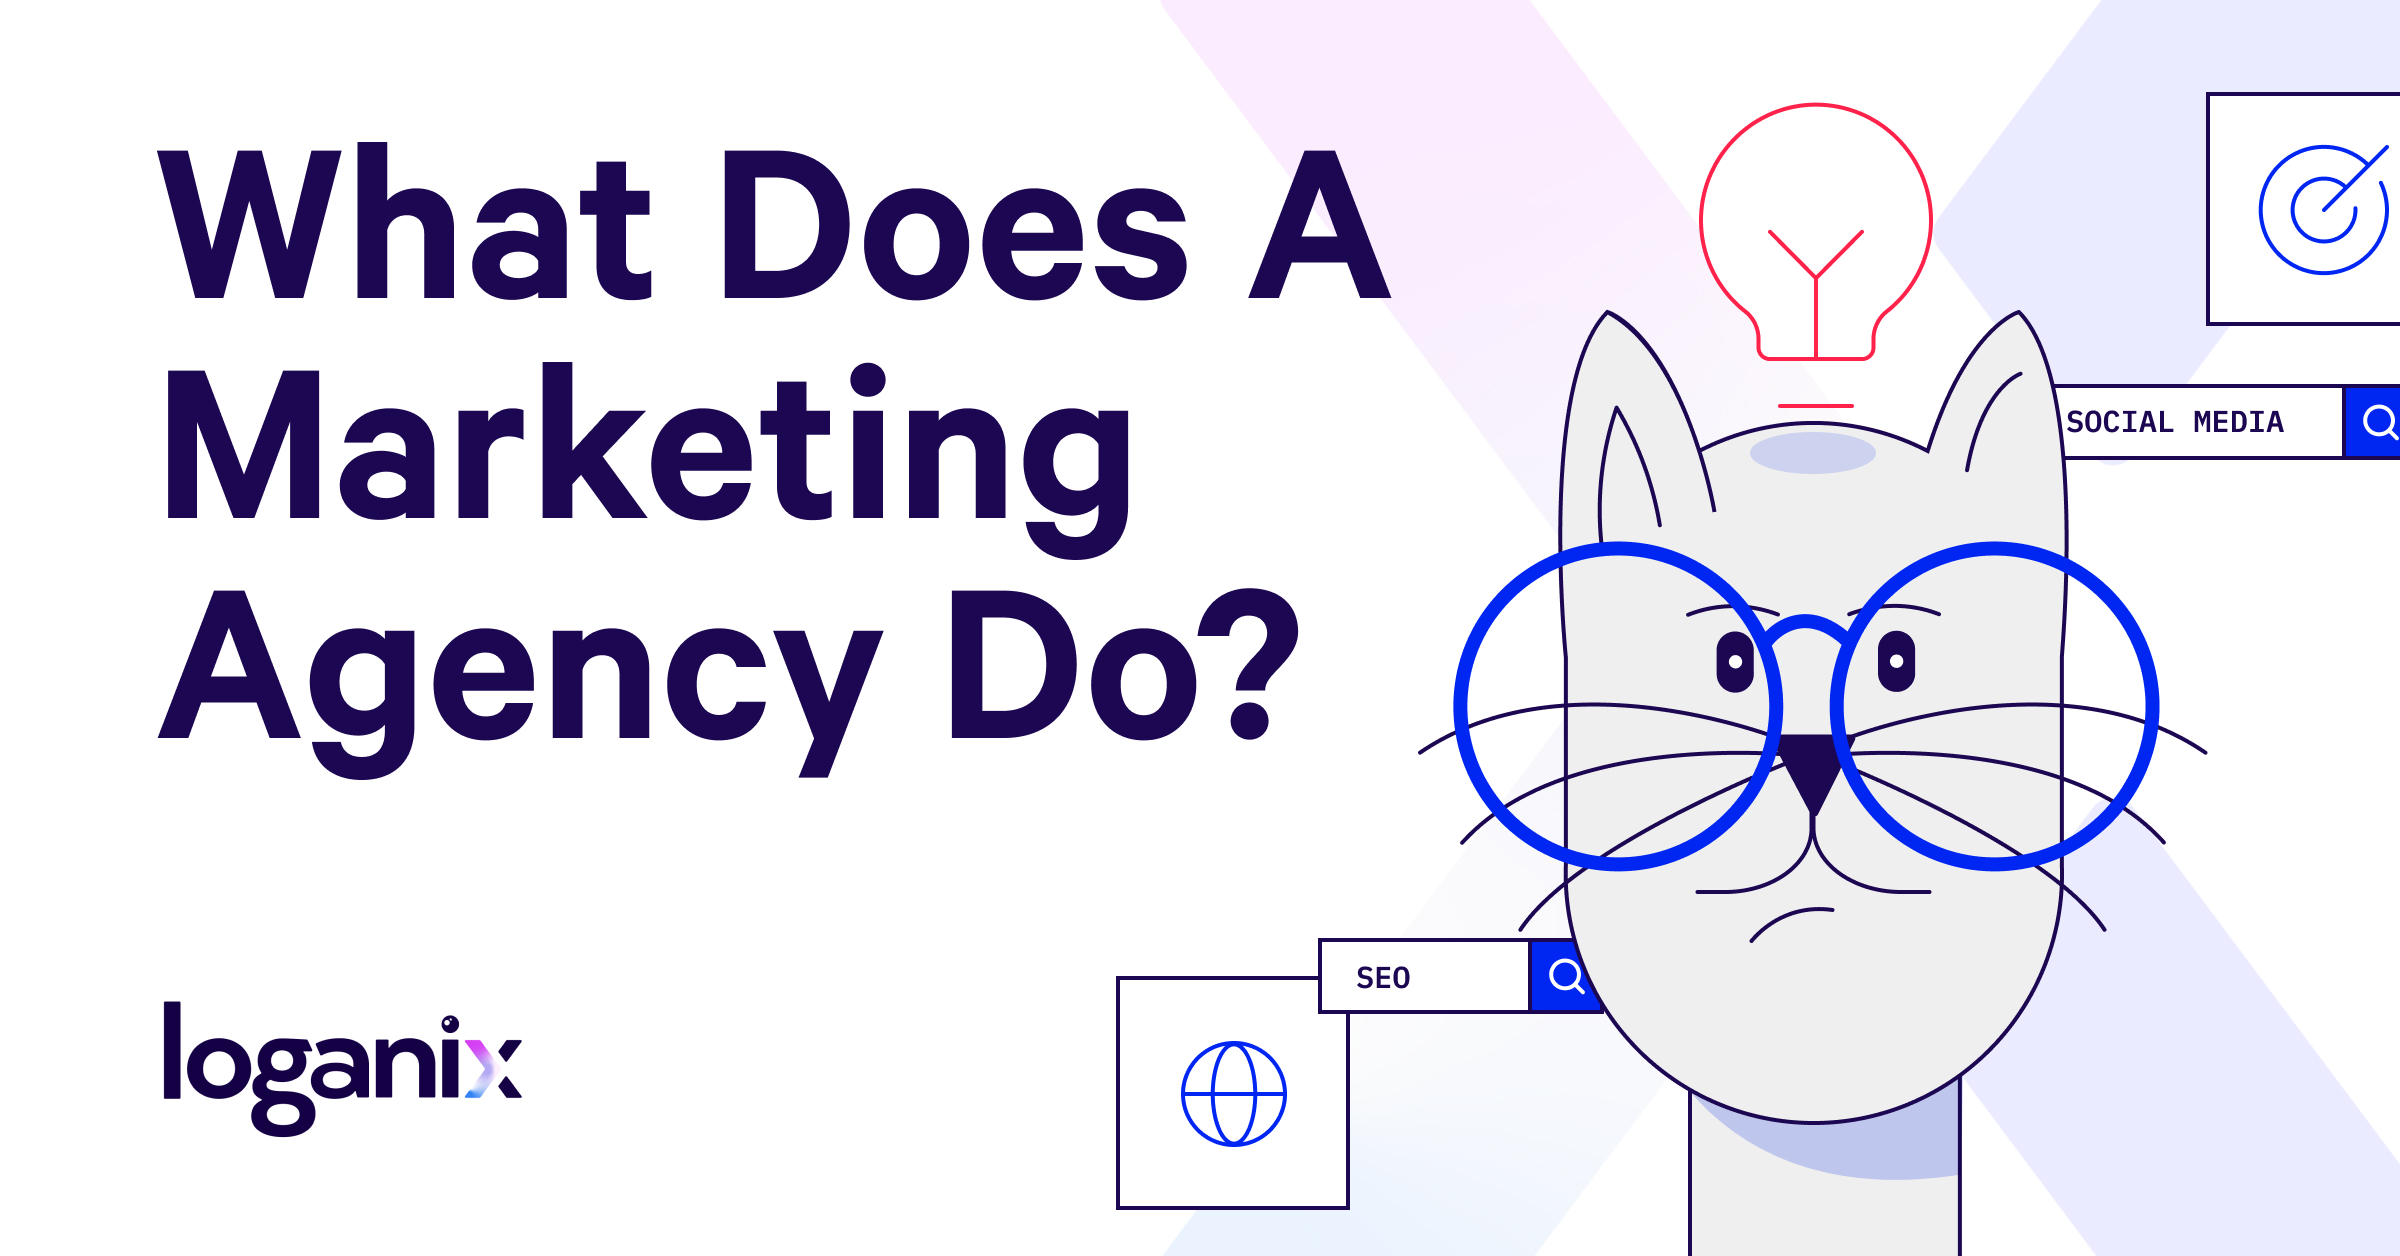 What Does A Marketing Agency Do?